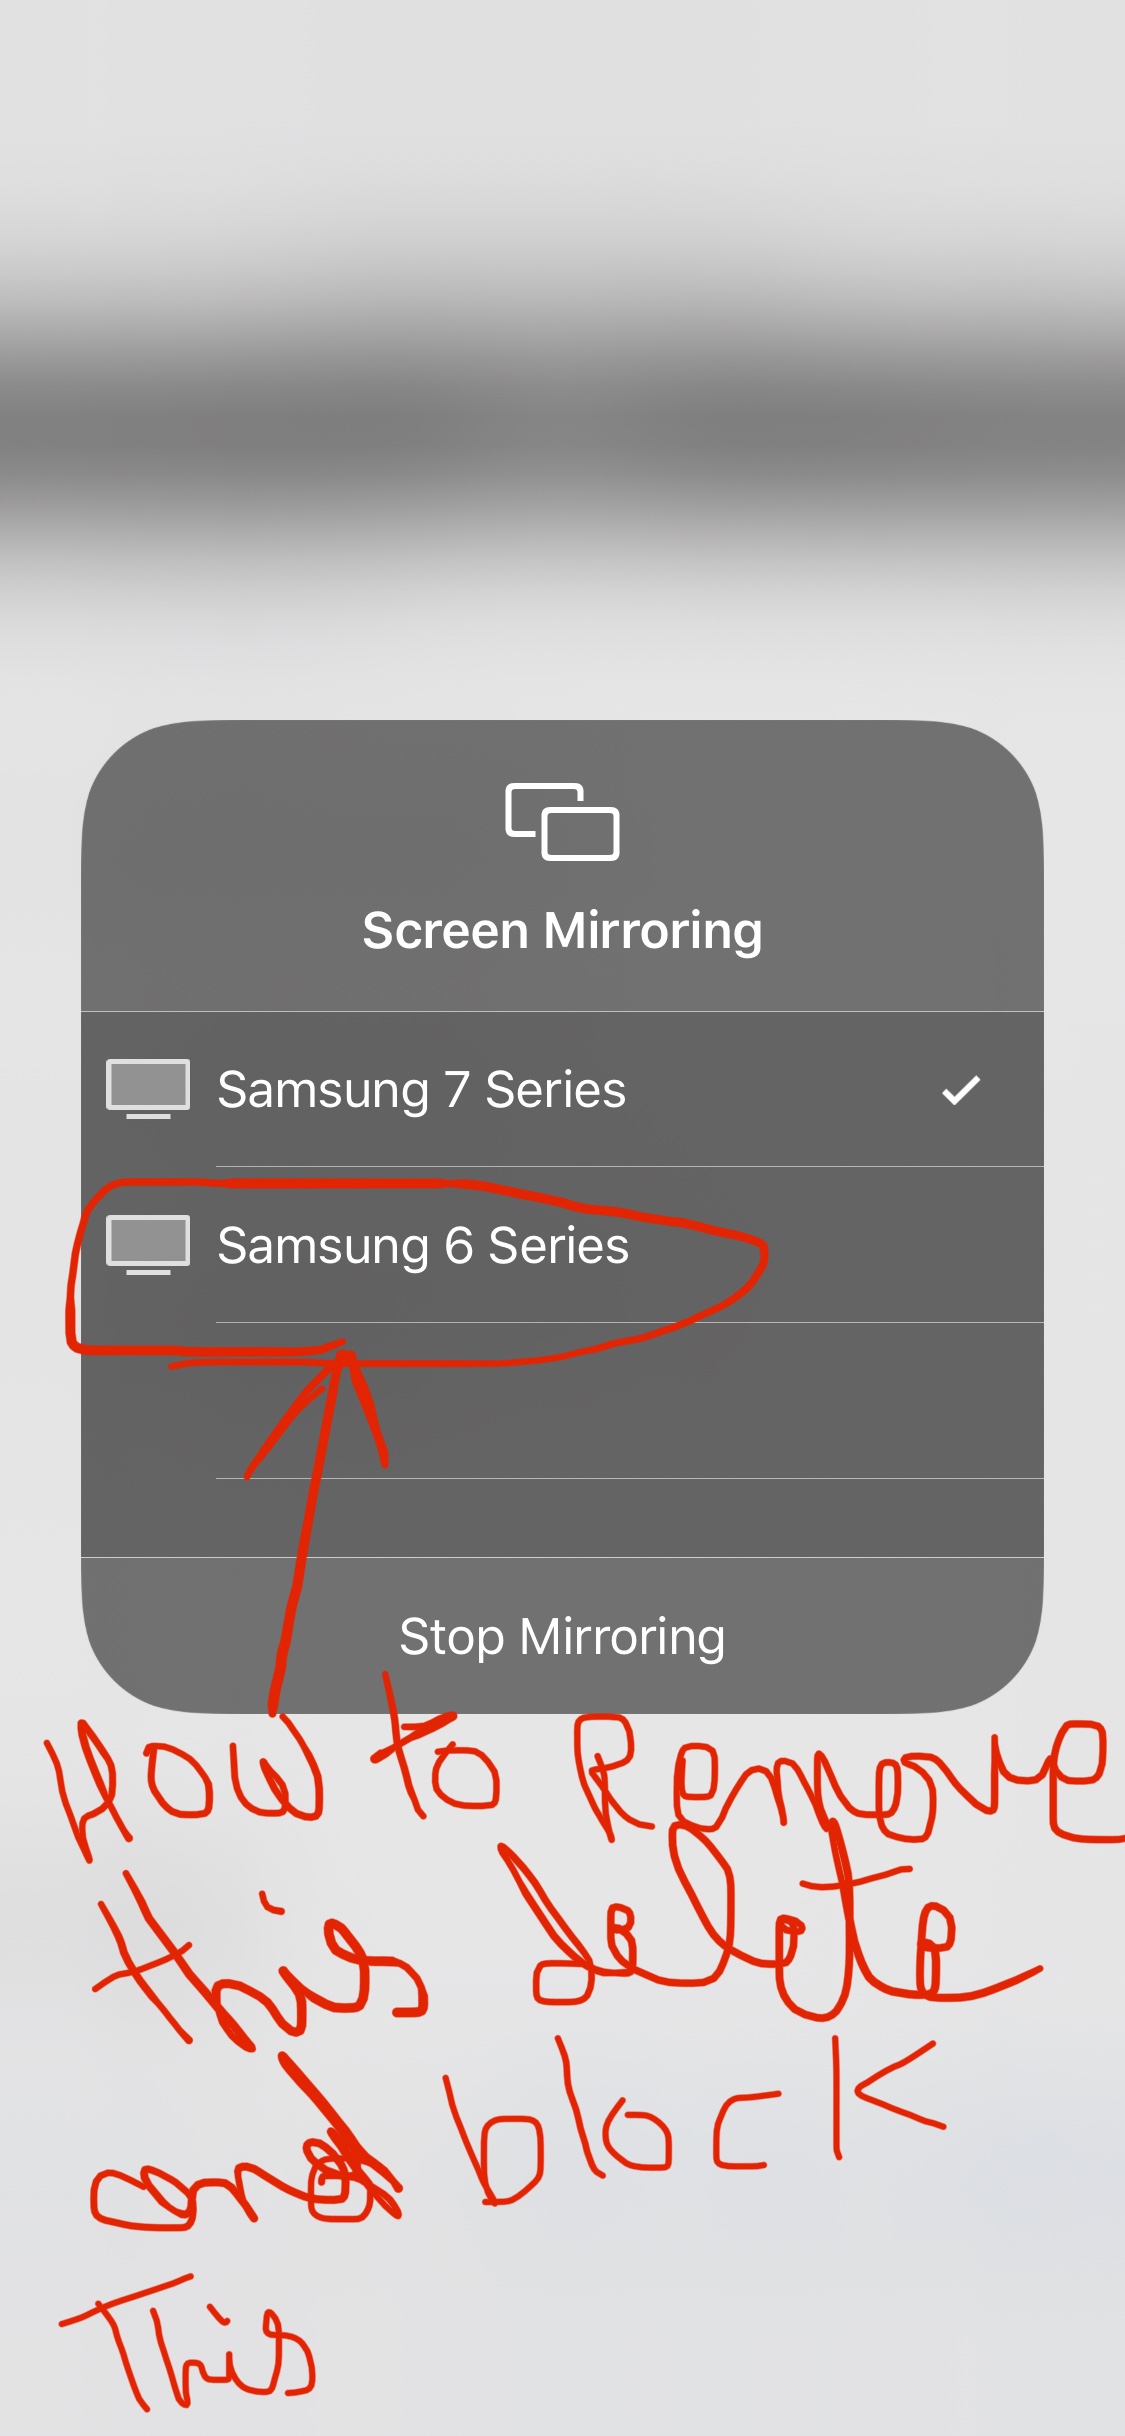 How To Remove Samsung Tv From Iphone, How To Remove Screen Mirroring From Iphone